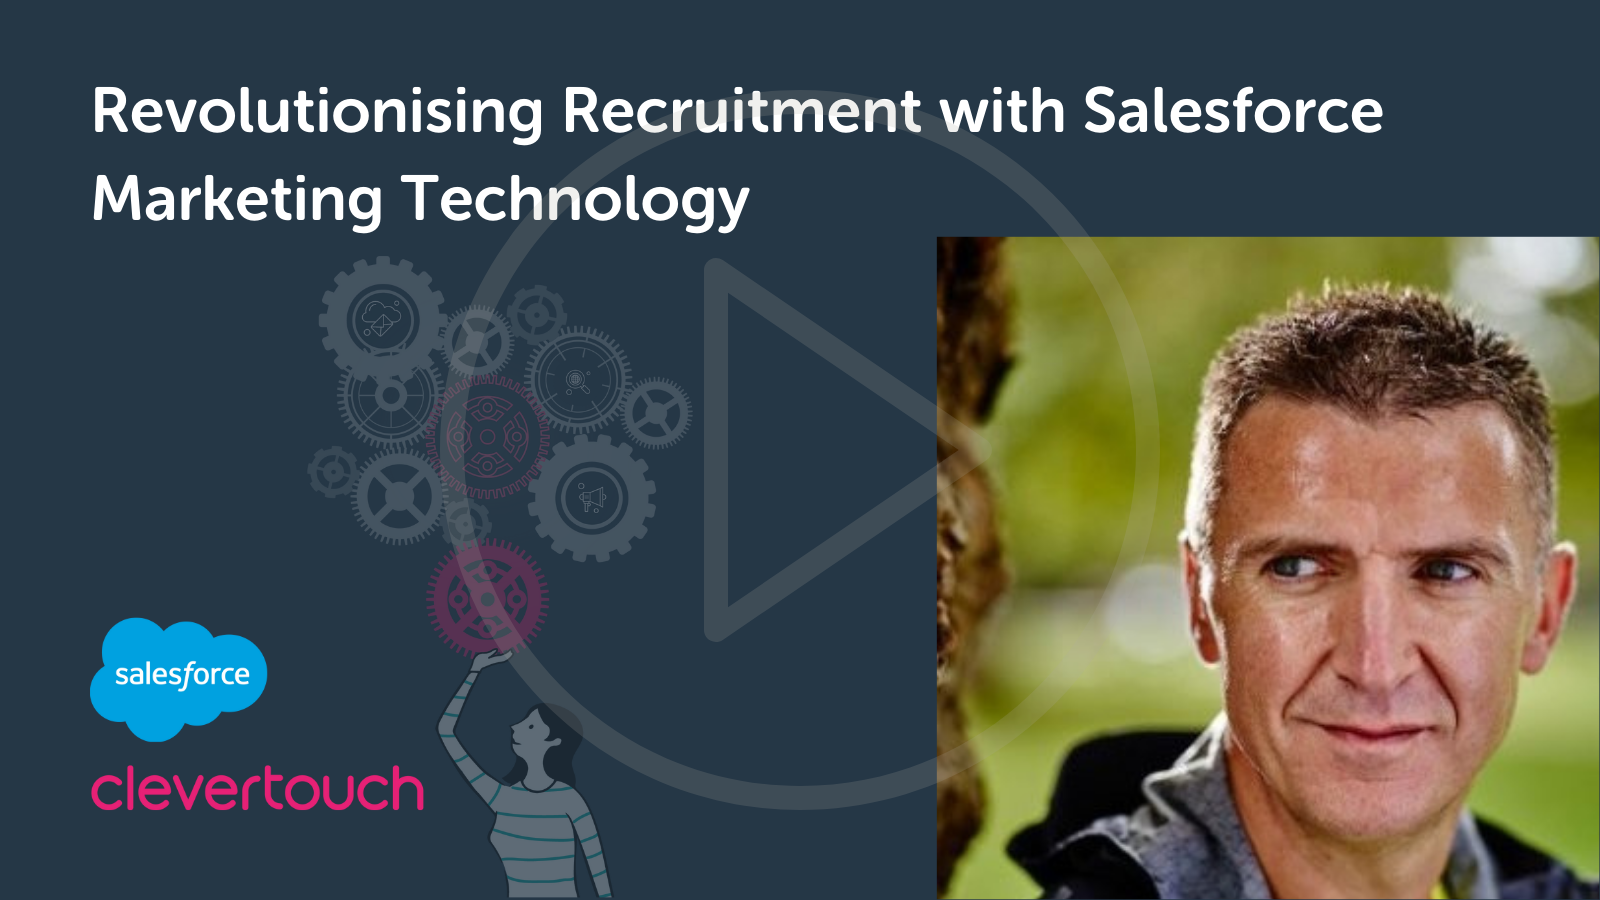 Revolutionising recruitment with Salesforce marketing technology webinar with Clevertouch